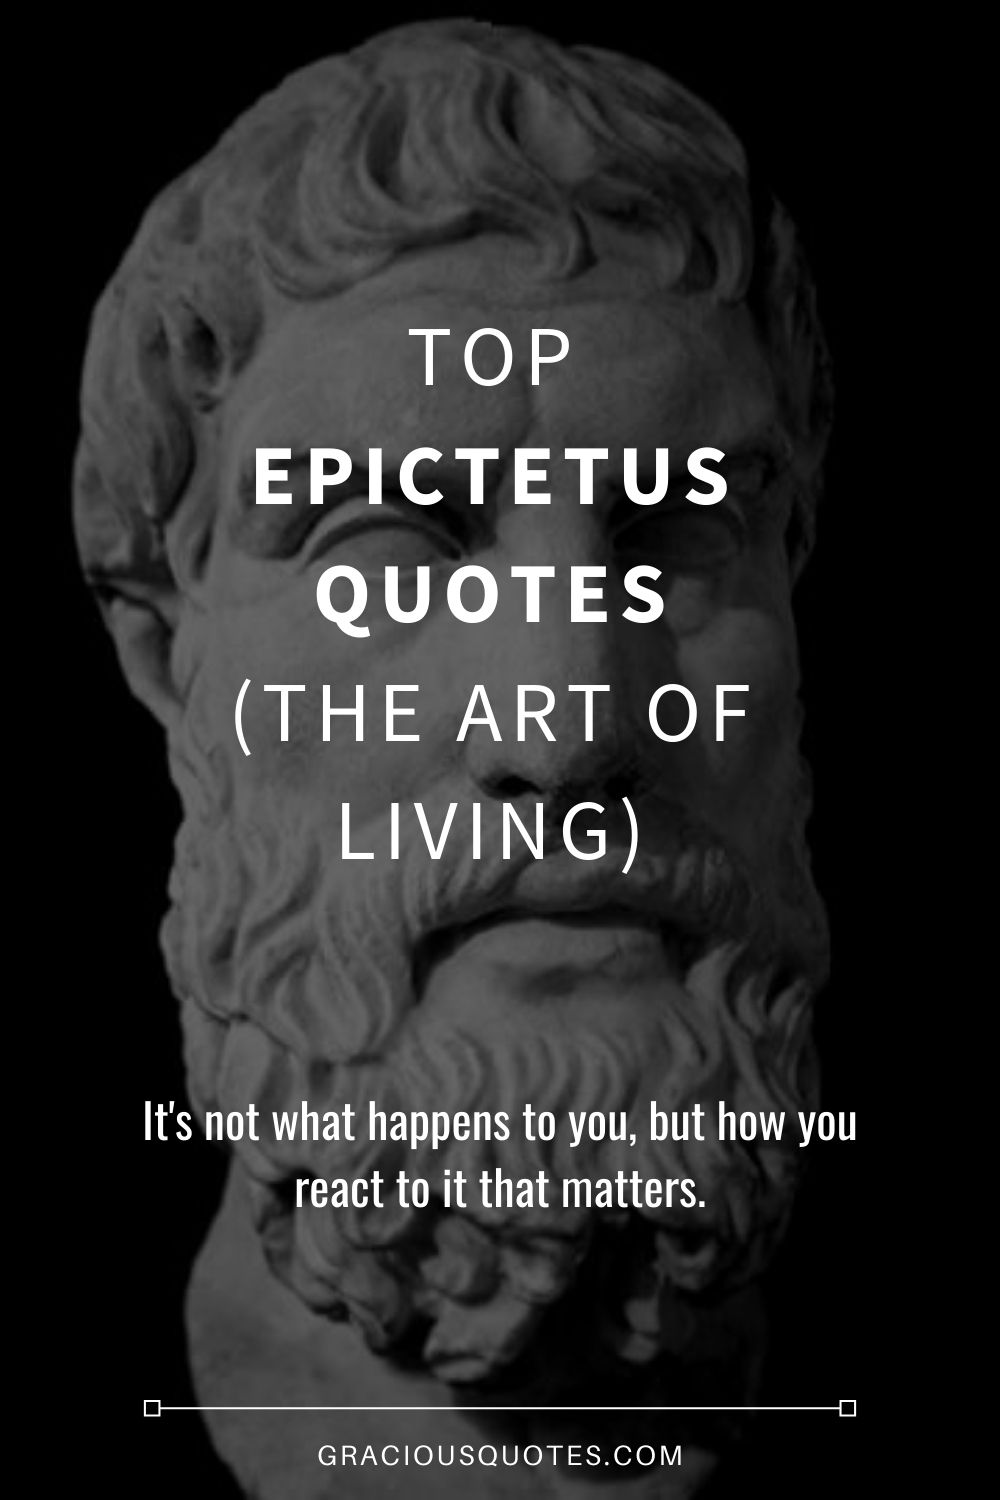 Top Epictetus Quotes (THE ART OF LIVING) - Gracious Quotes